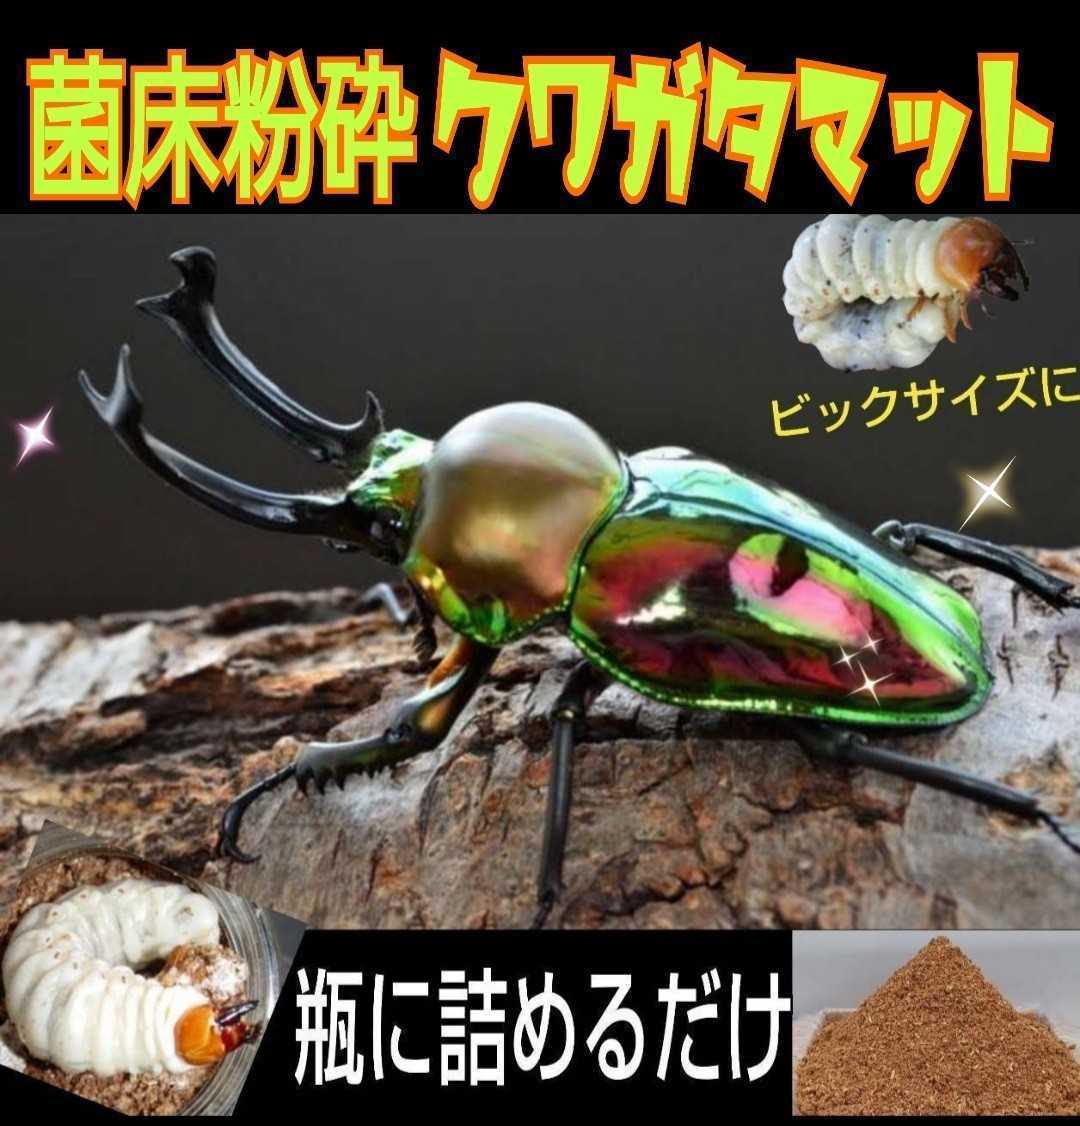 himalaya common ... floor stag beetle mat * bin .... only! the first .. small amount . also convenience *o ok wa, common ta, rainbow color, saw series eminent! sawtooth oak, 100%